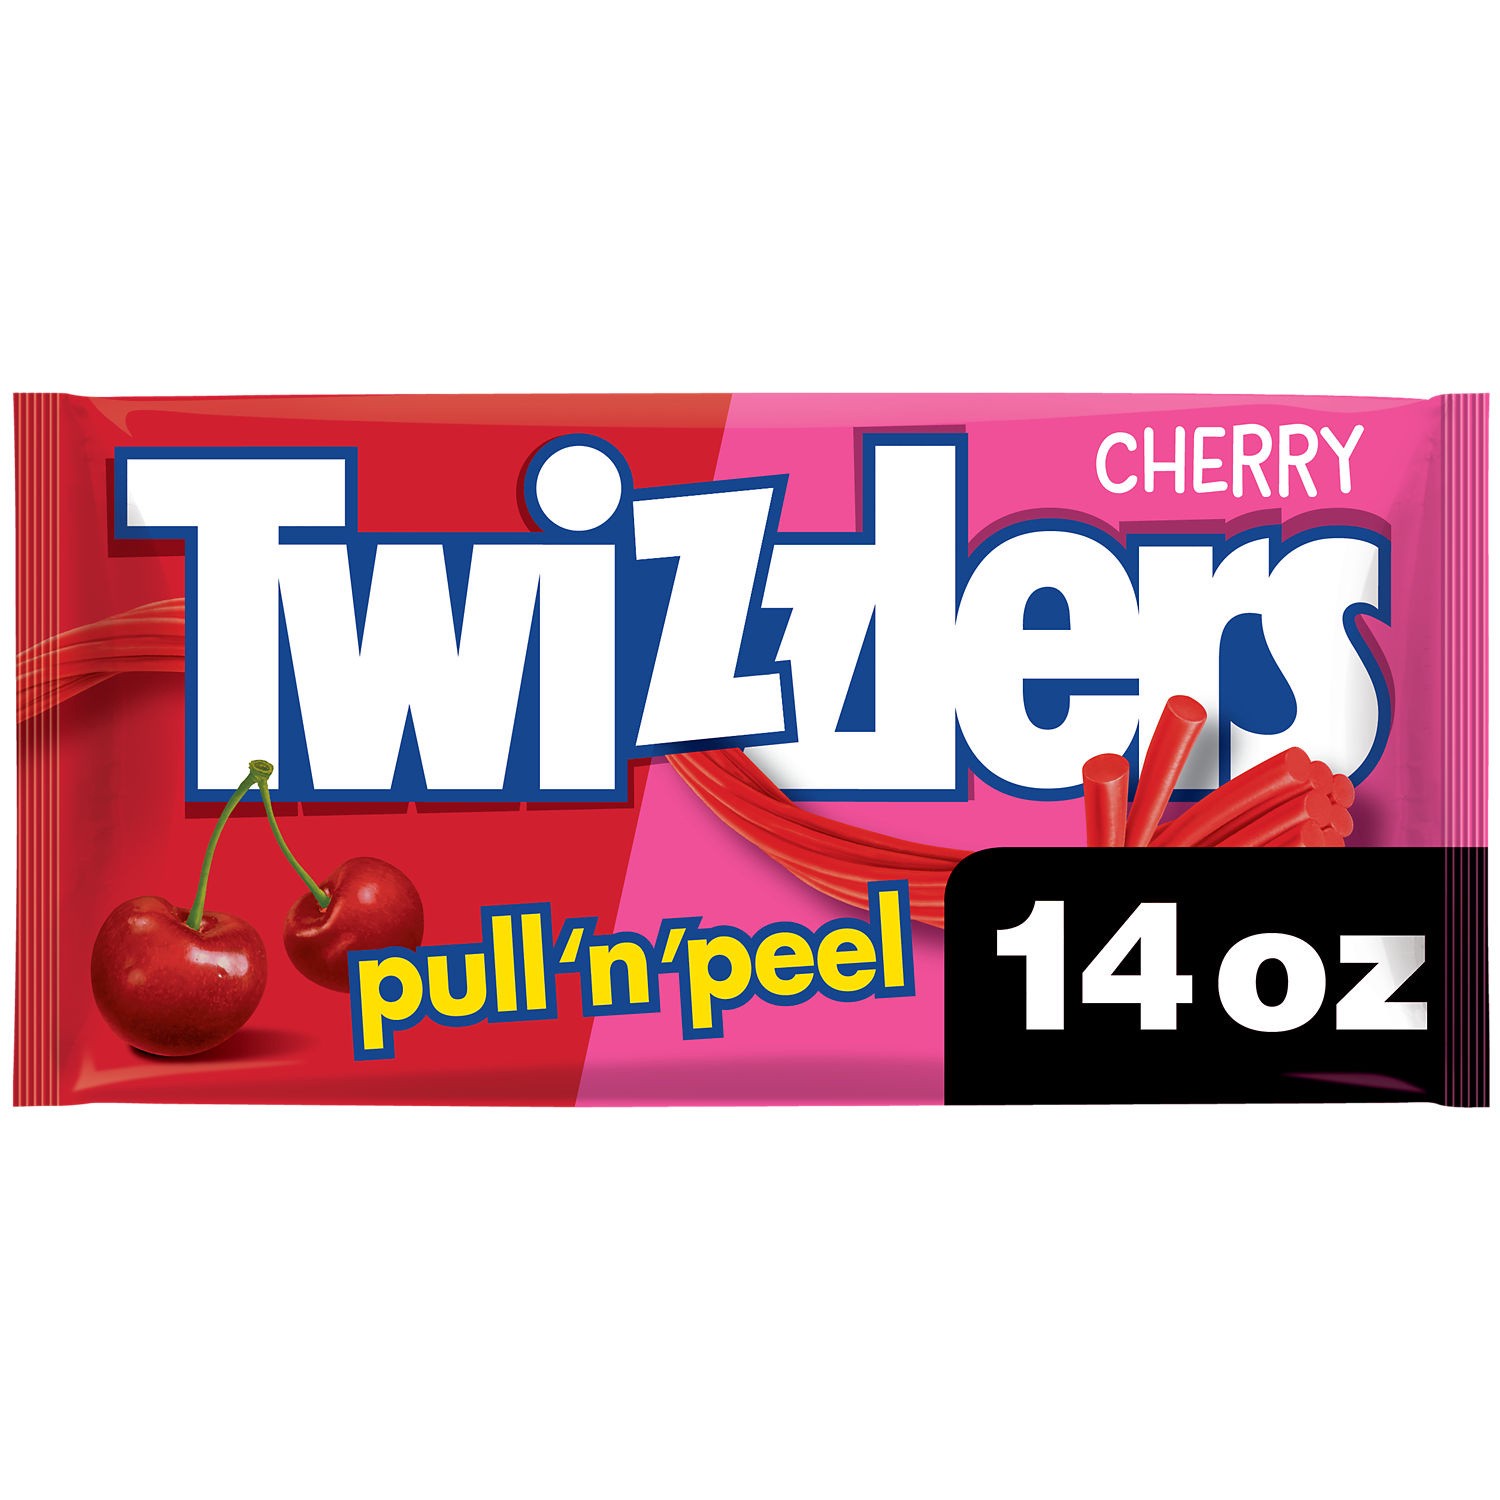 slide 6 of 7, Twizzlers PULL 'N' PEEL Cherry Flavored Licorice Style, Low Fat Candy Bag, 14 oz, 14 oz